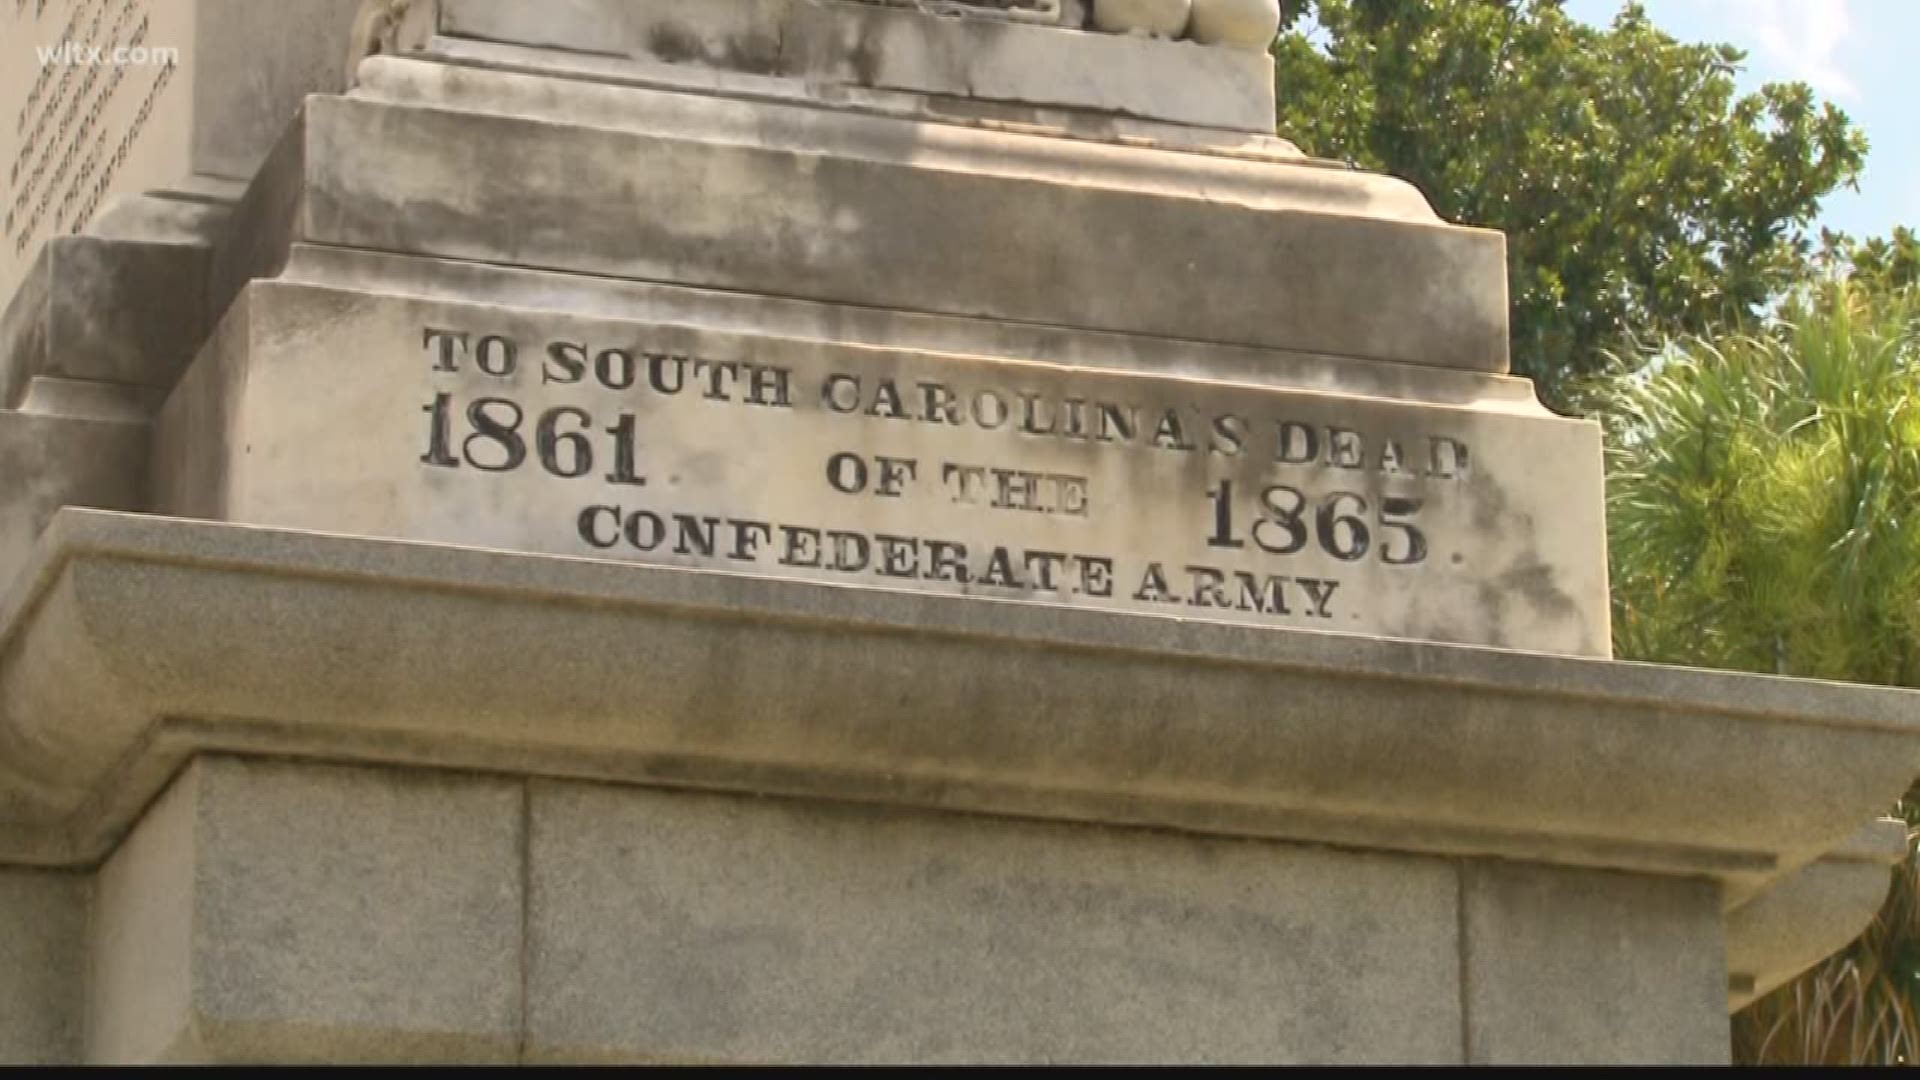 The latest Winthrop Poll shows Southerners' conflicted on placement/removal of Confederate monuments